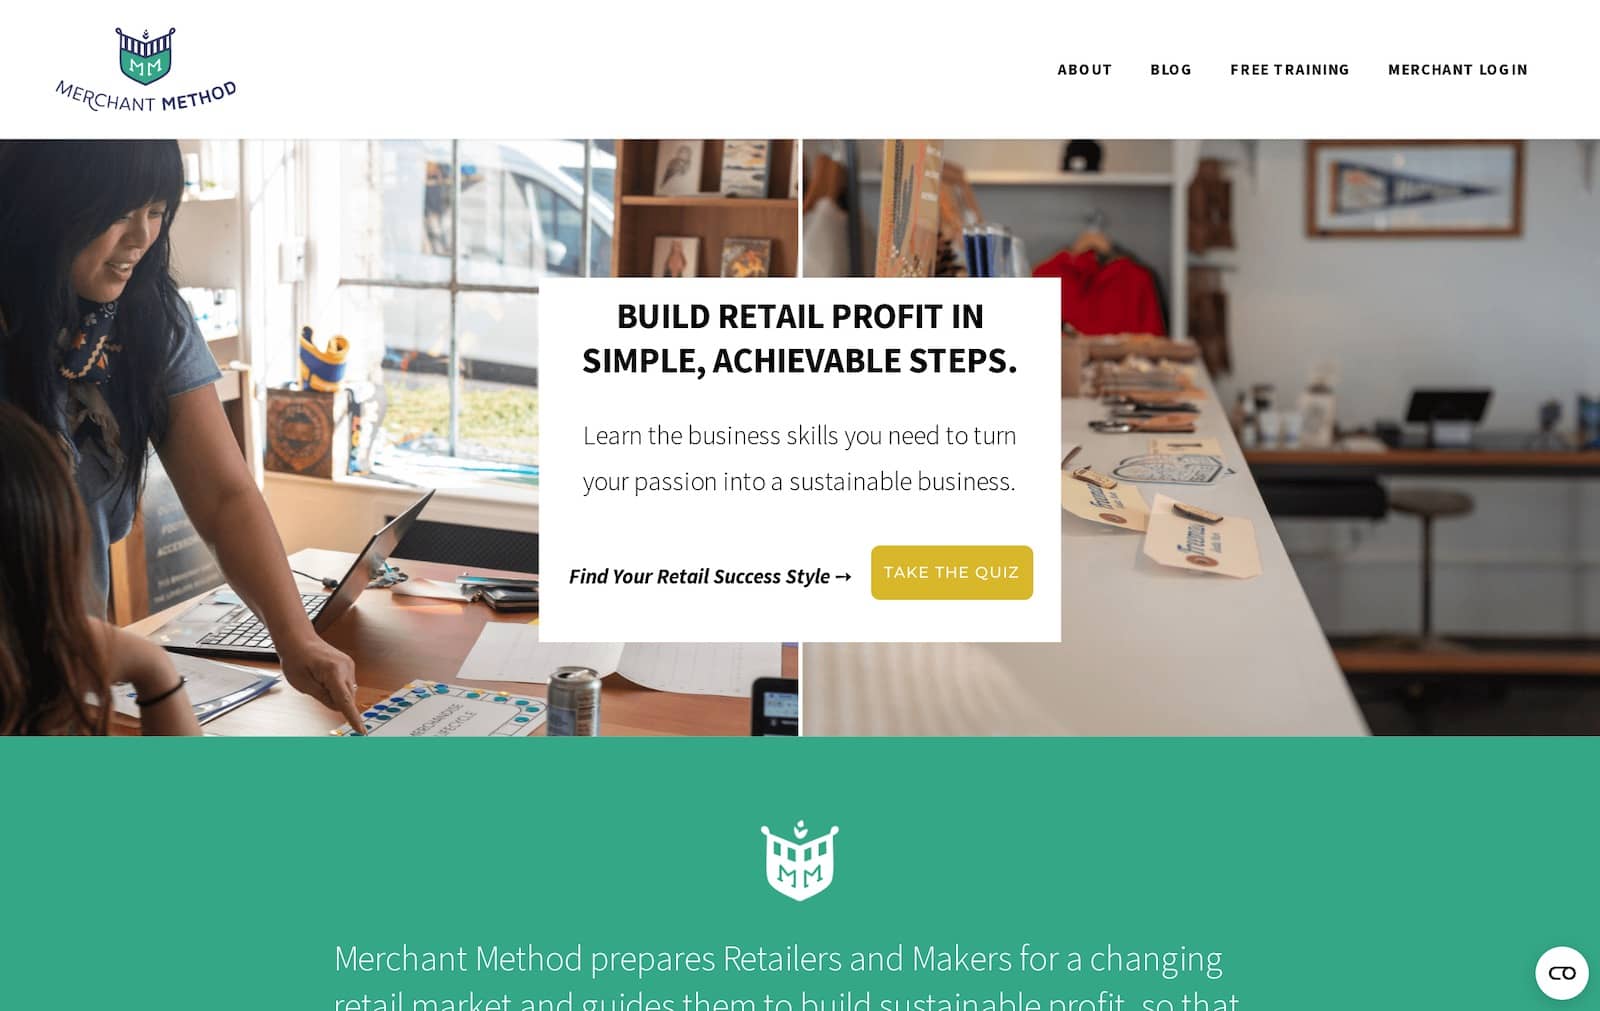 Merchant Method is a website built using Weebly.